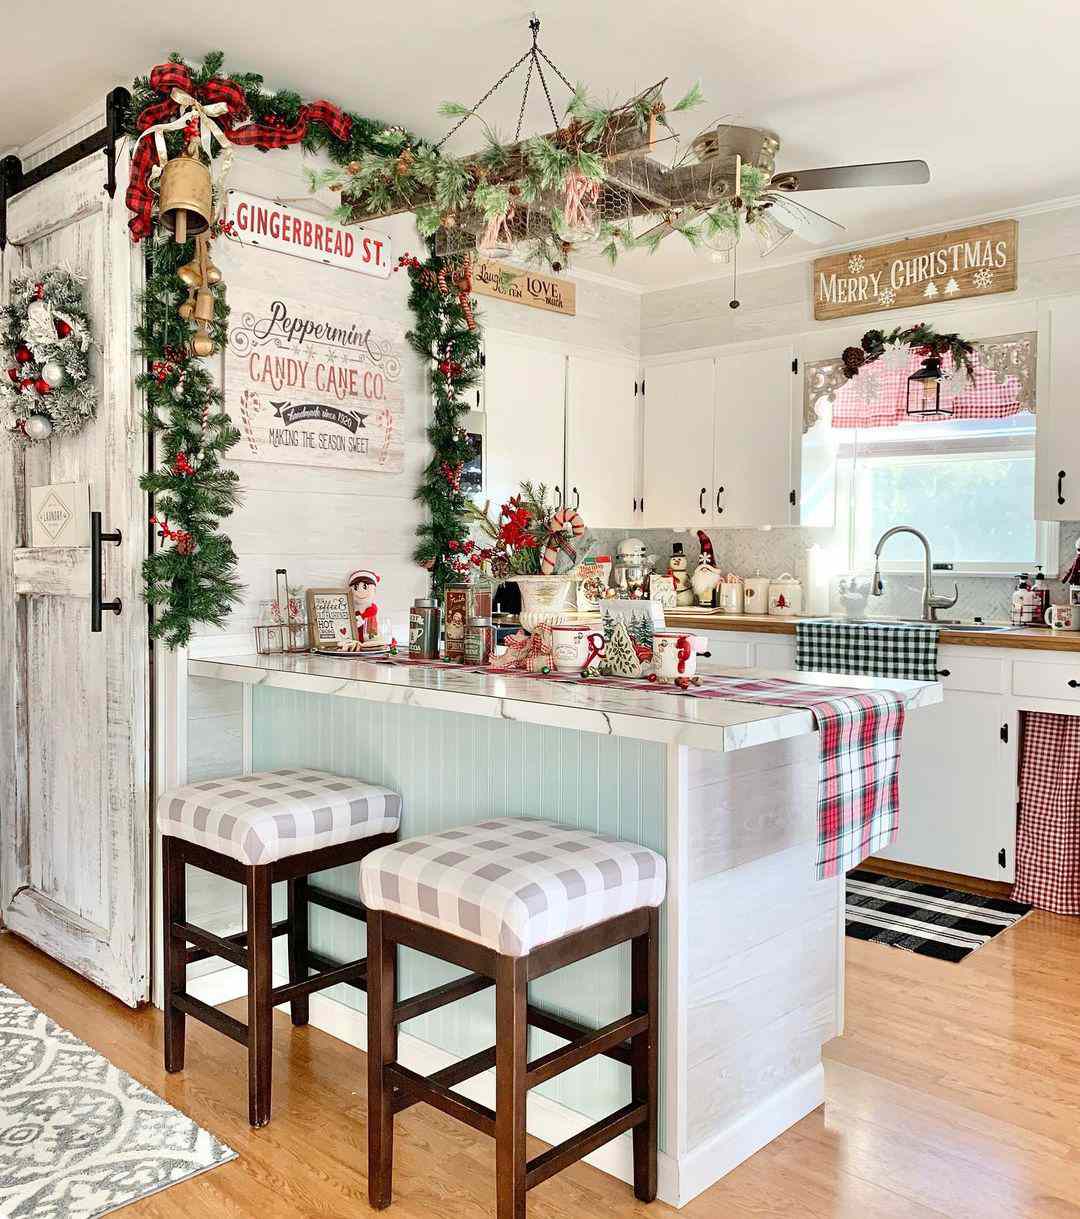 Christmas Candy Kitchen